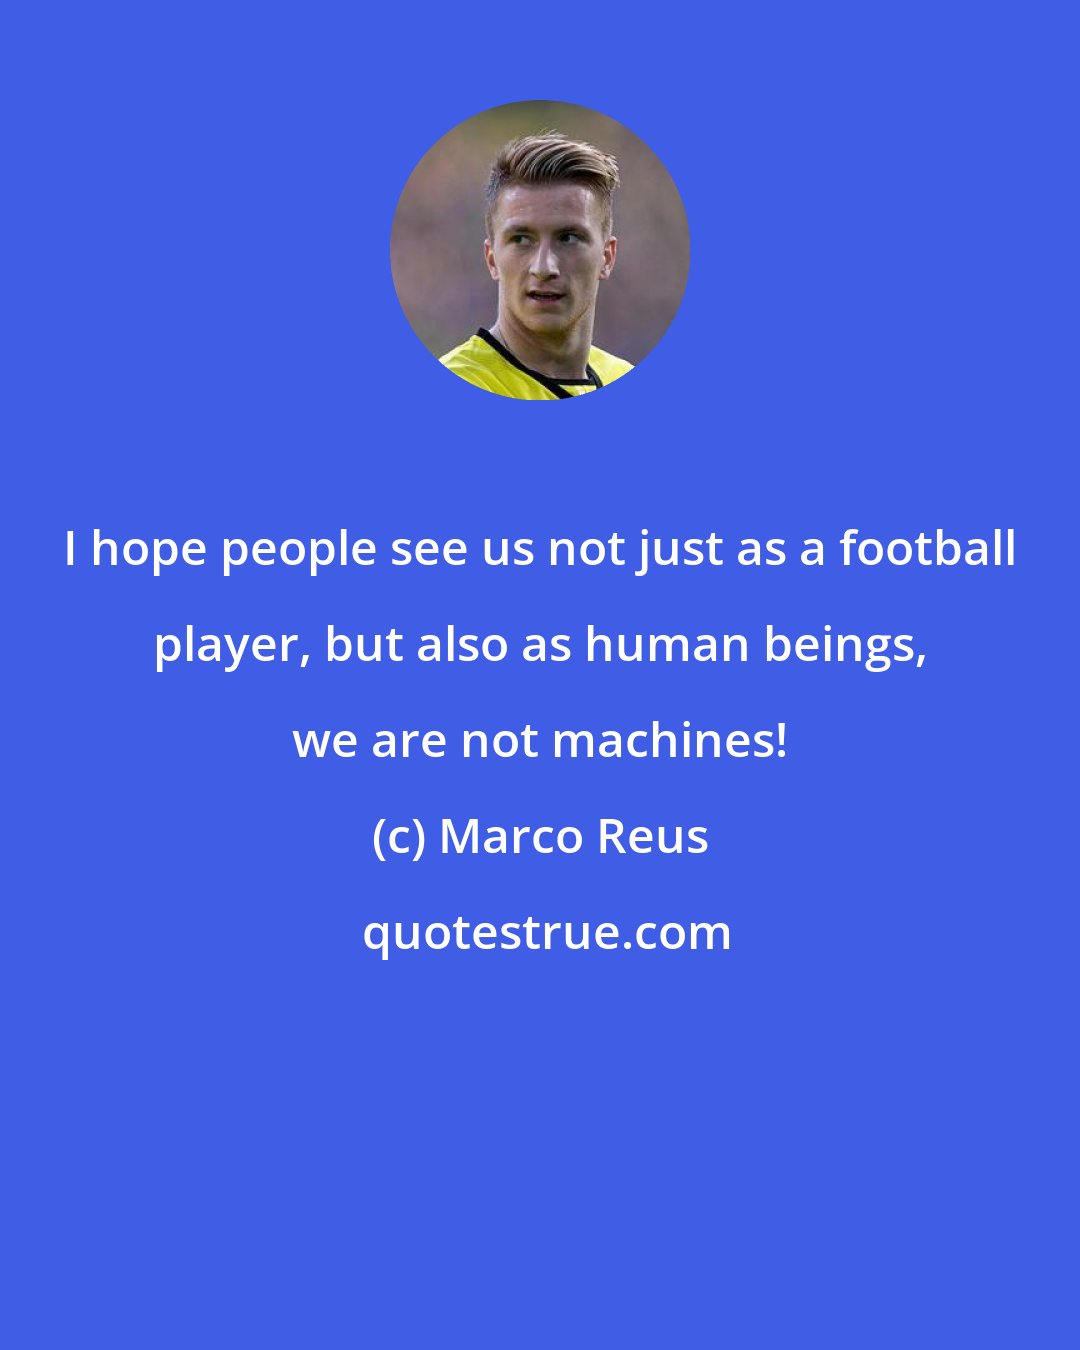 Marco Reus: I hope people see us not just as a football player, but also as human beings, we are not machines!